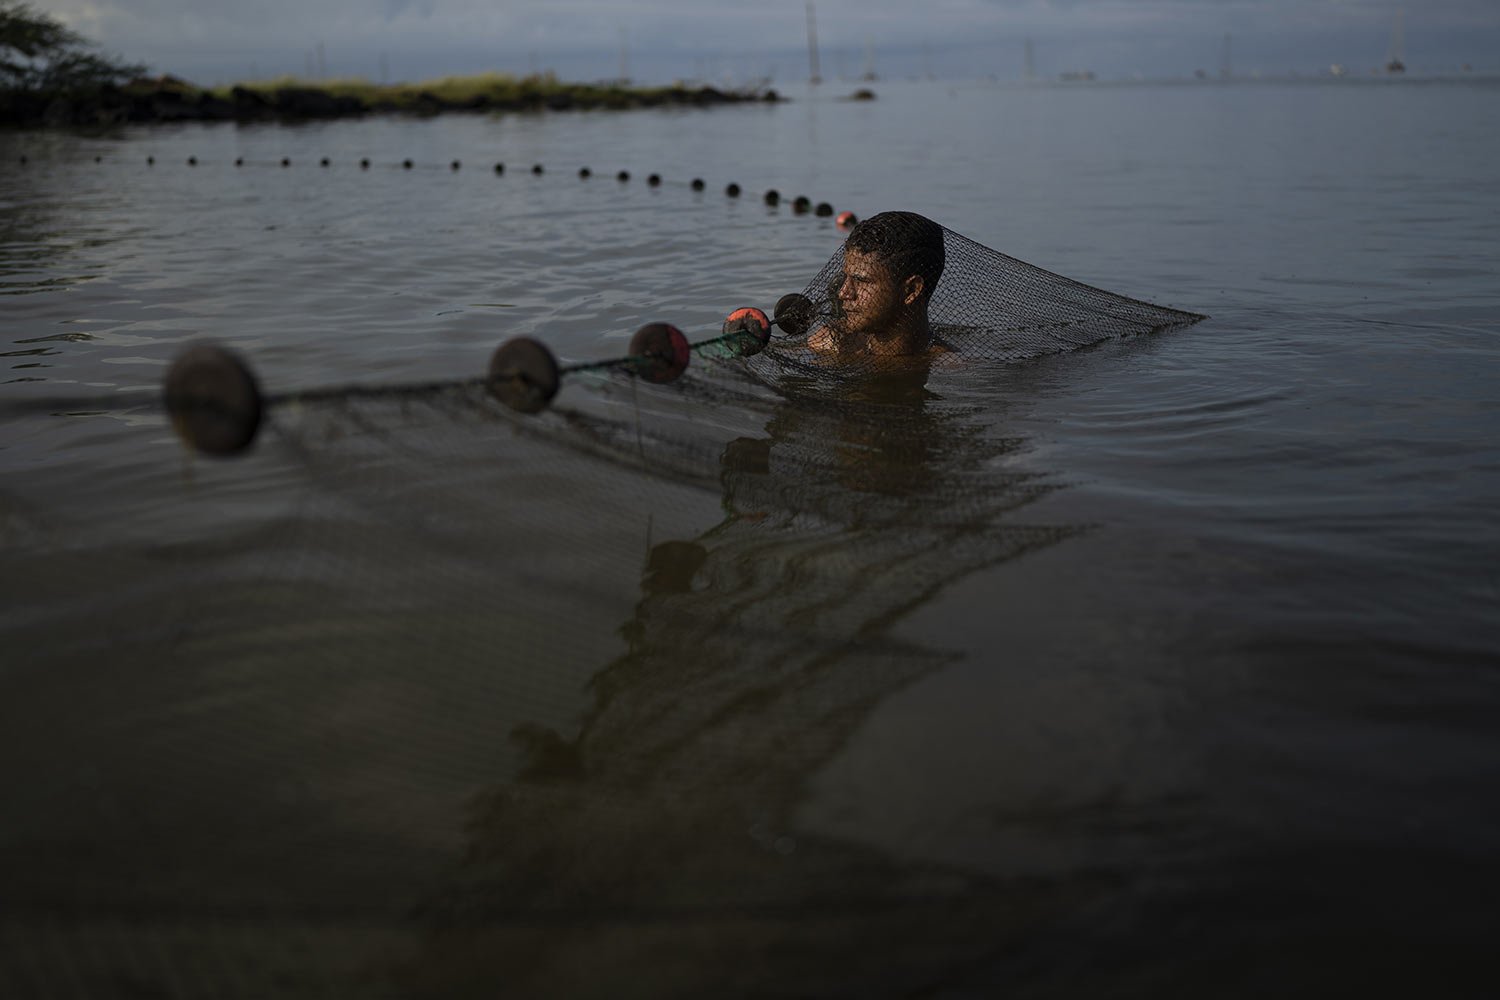  Enderson Mendoza cleans a fishing net as he and others fish for shrimp in Lake Maracaibo near Cabimas, Venezuela, Wednesday, Oct. 12, 2022. (AP Photo/Ariana Cubillos) 